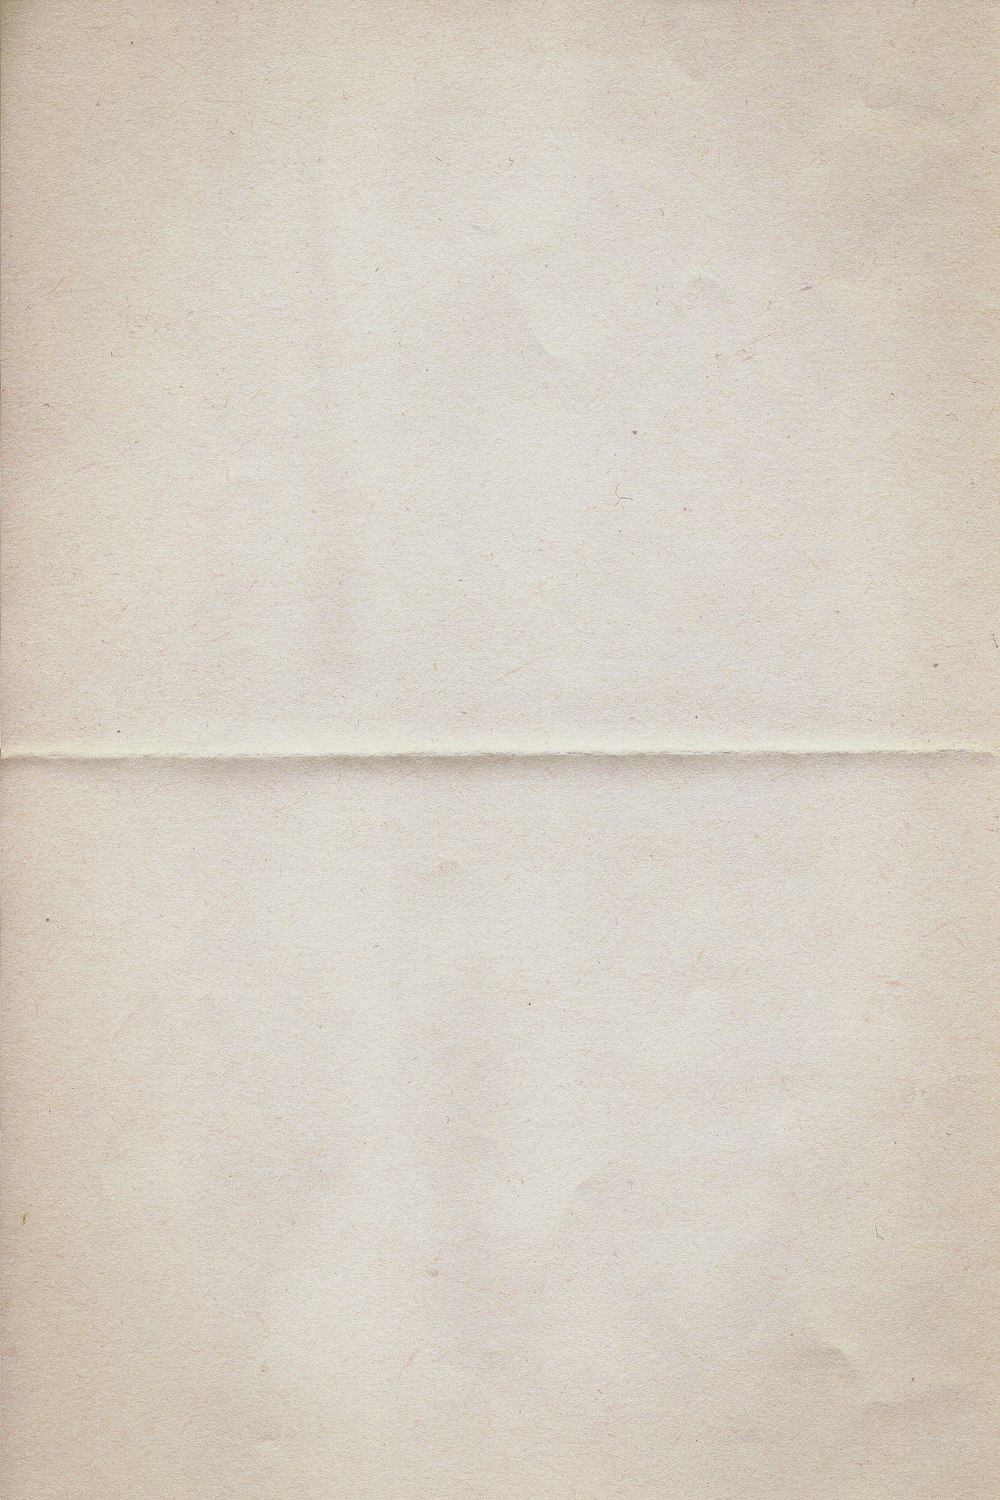 a piece of white paper with a brown border